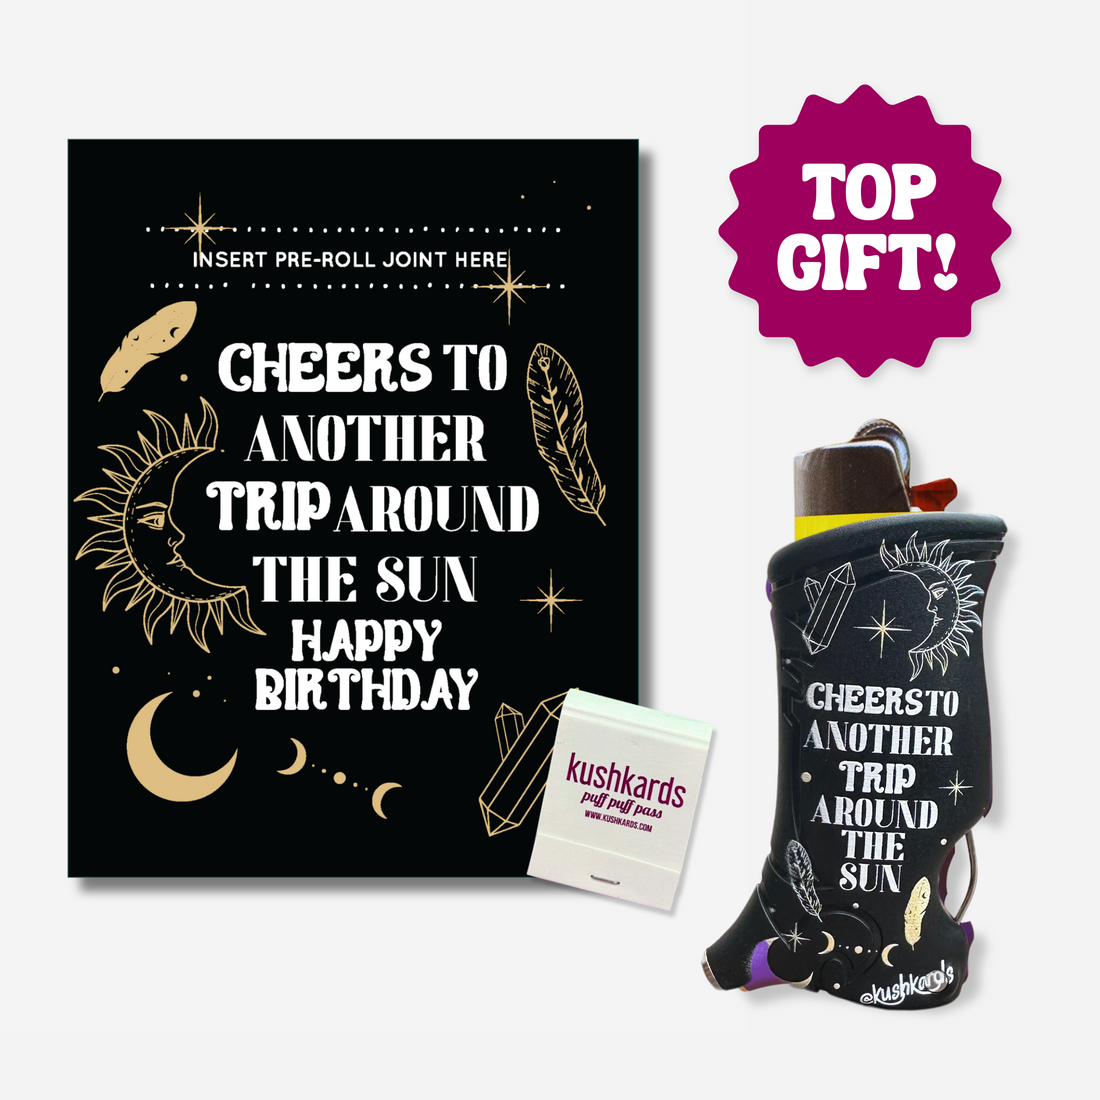 Celestial-themed birthday card with the text &quot;Cheers to Another Trip Around the Sun Happy Birthday,&quot; featuring a slot to insert a pre-rolled item, with an included matchbook displaying the brand name &quot;KushKards puff puff pass.&quot;